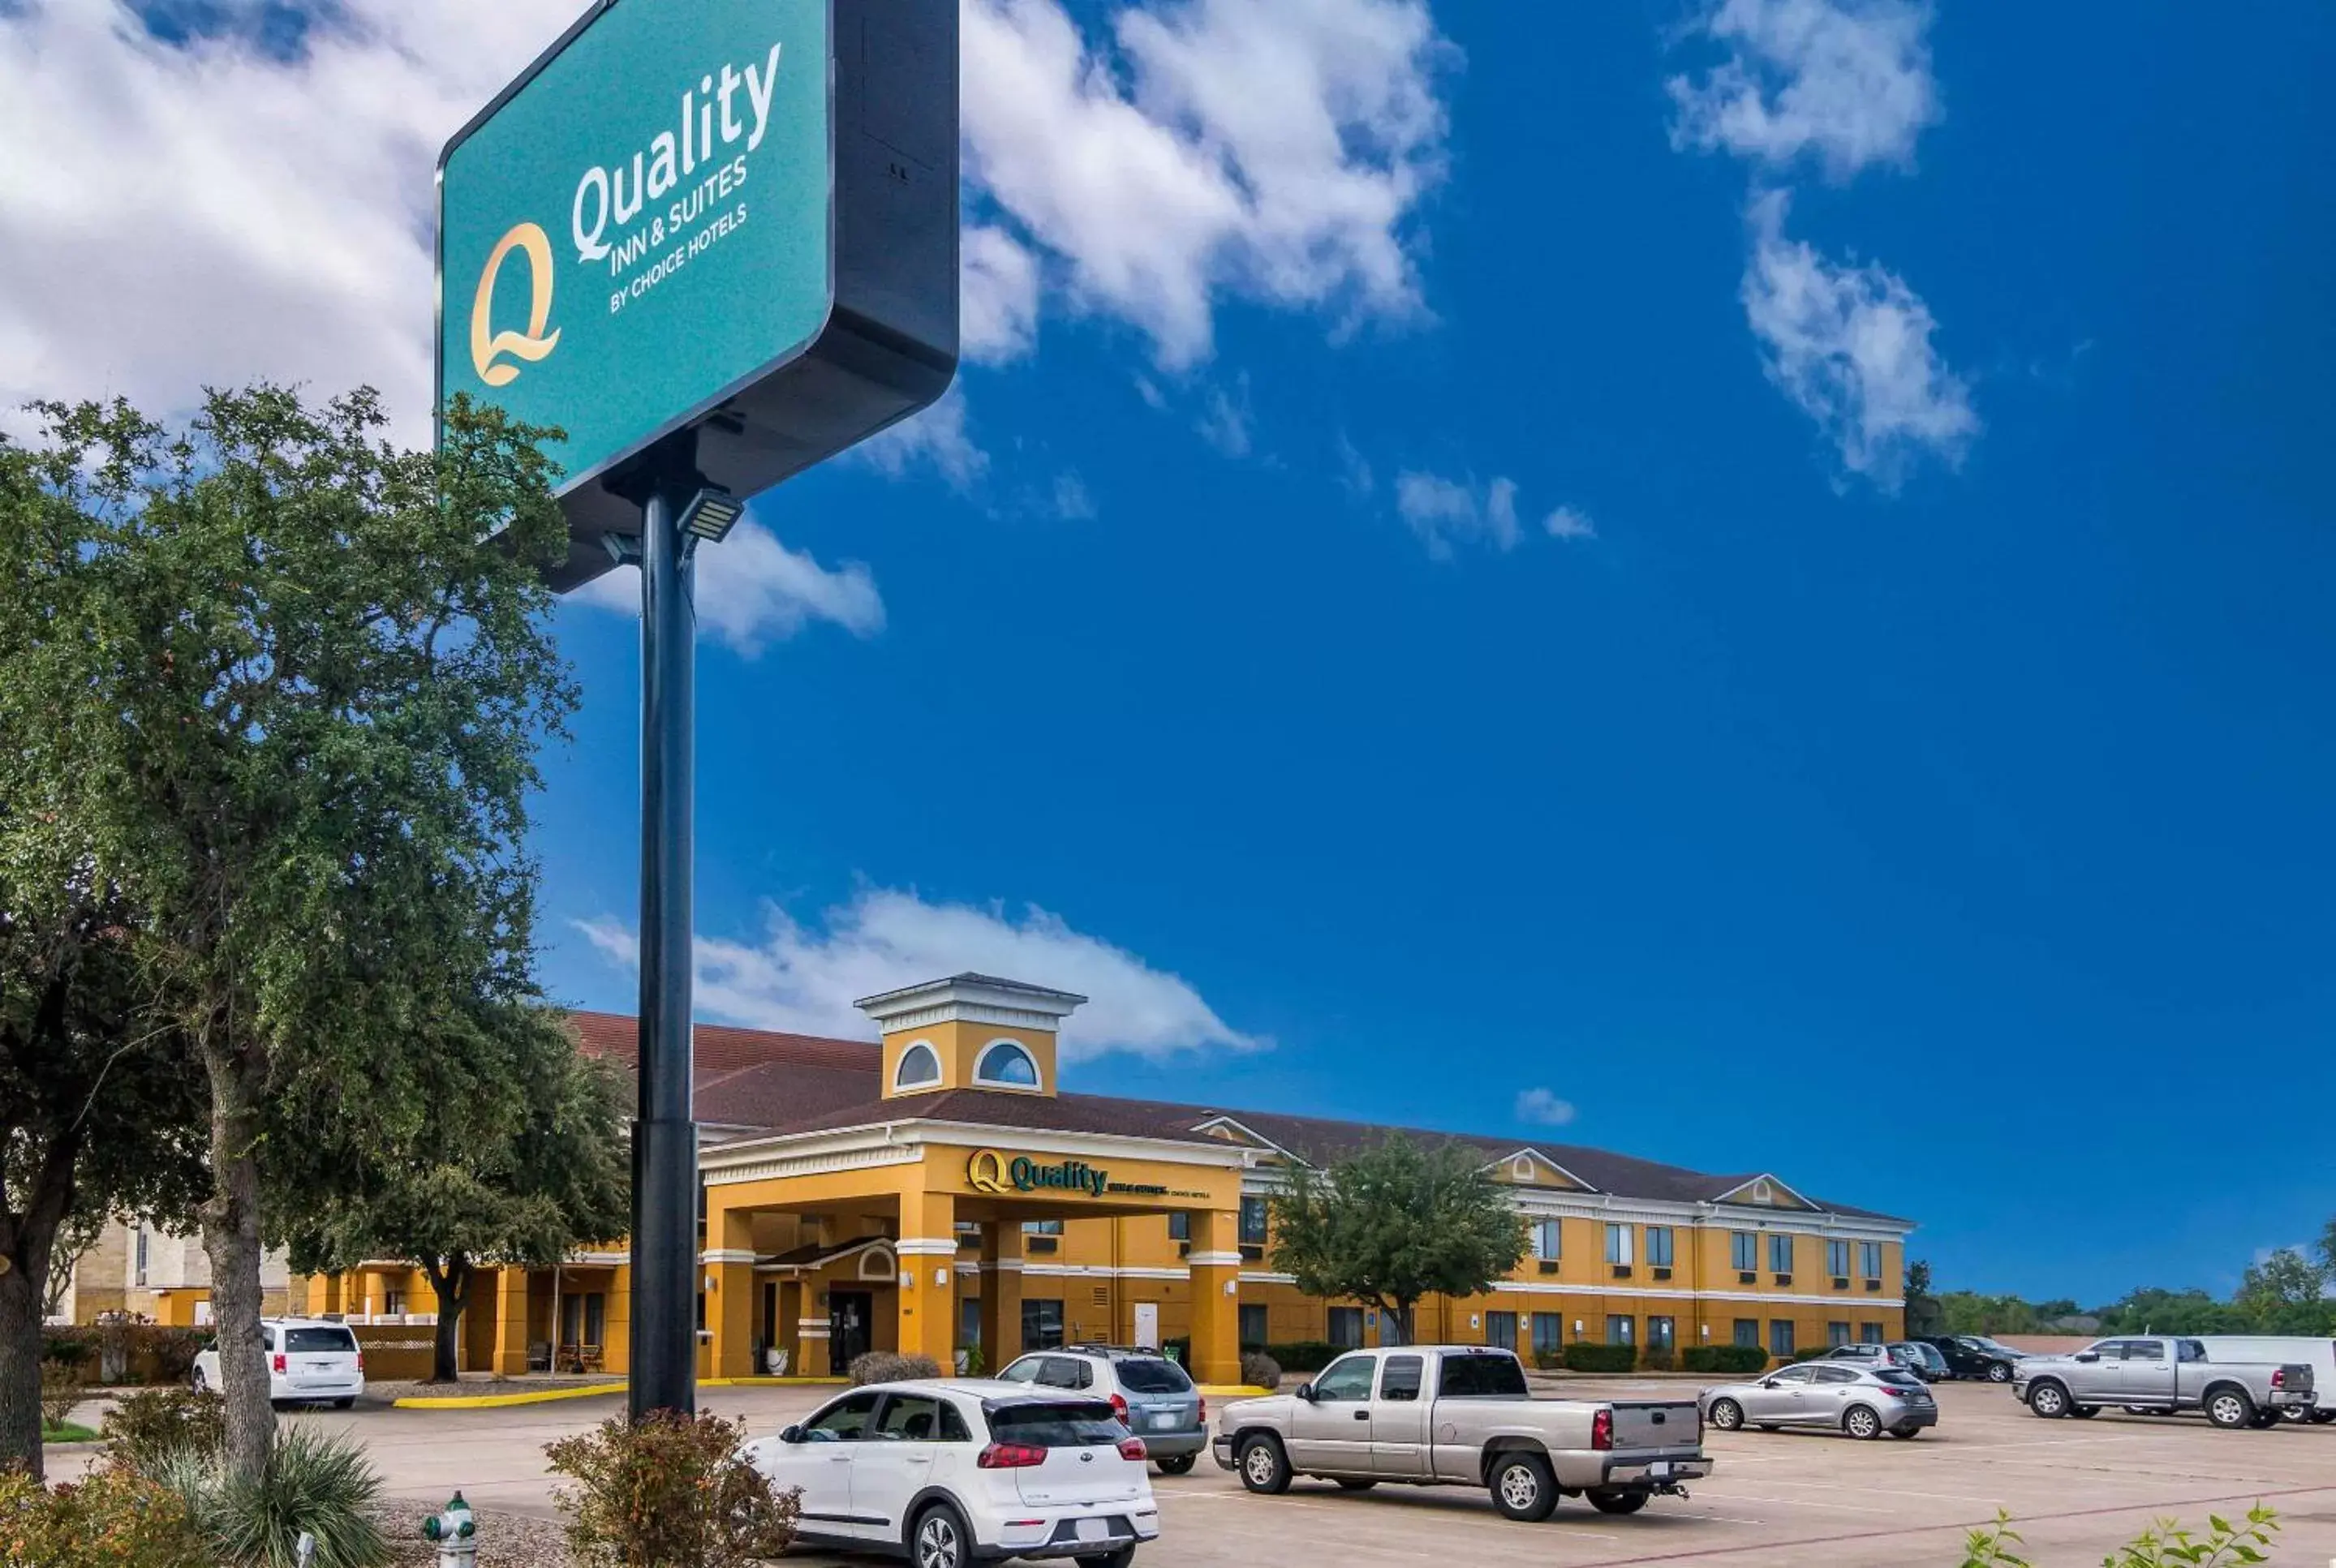 Property Building in Quality Inn & Suites Granbury